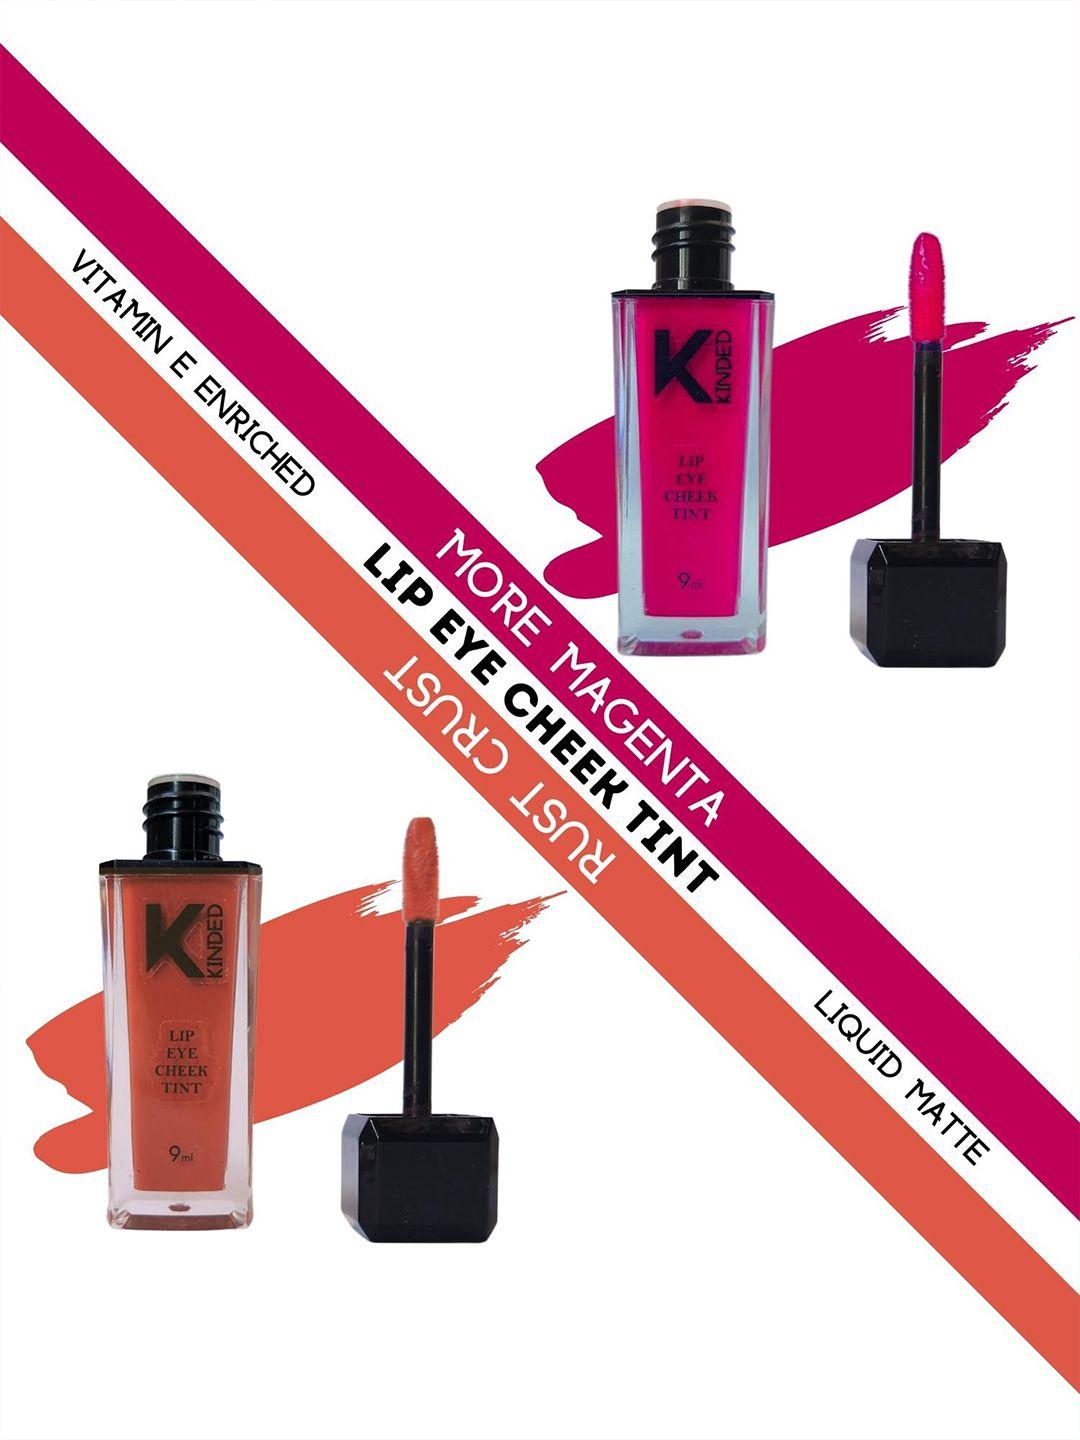 kinded-set-of-2-lip-eye-cheek-tint-with-vitamin-e---more-magenta-02-&-rust-crust-05